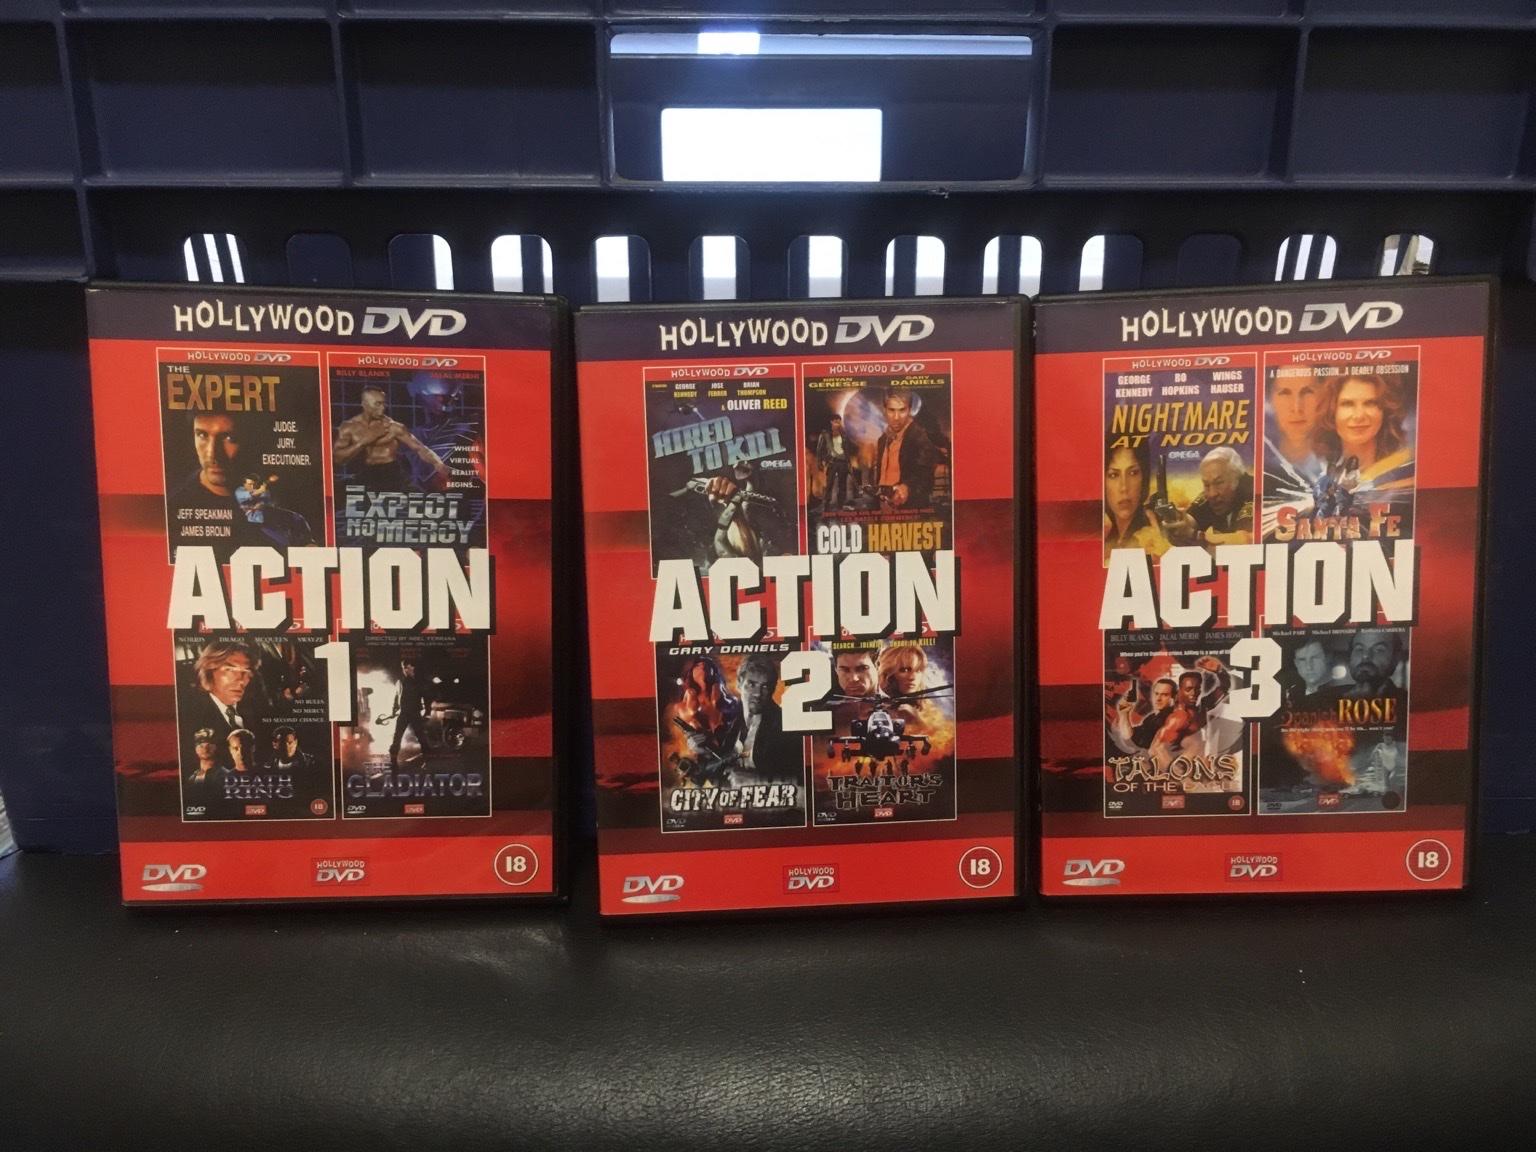 DVDS for Sale | DVD & Blu-ray in Shpock